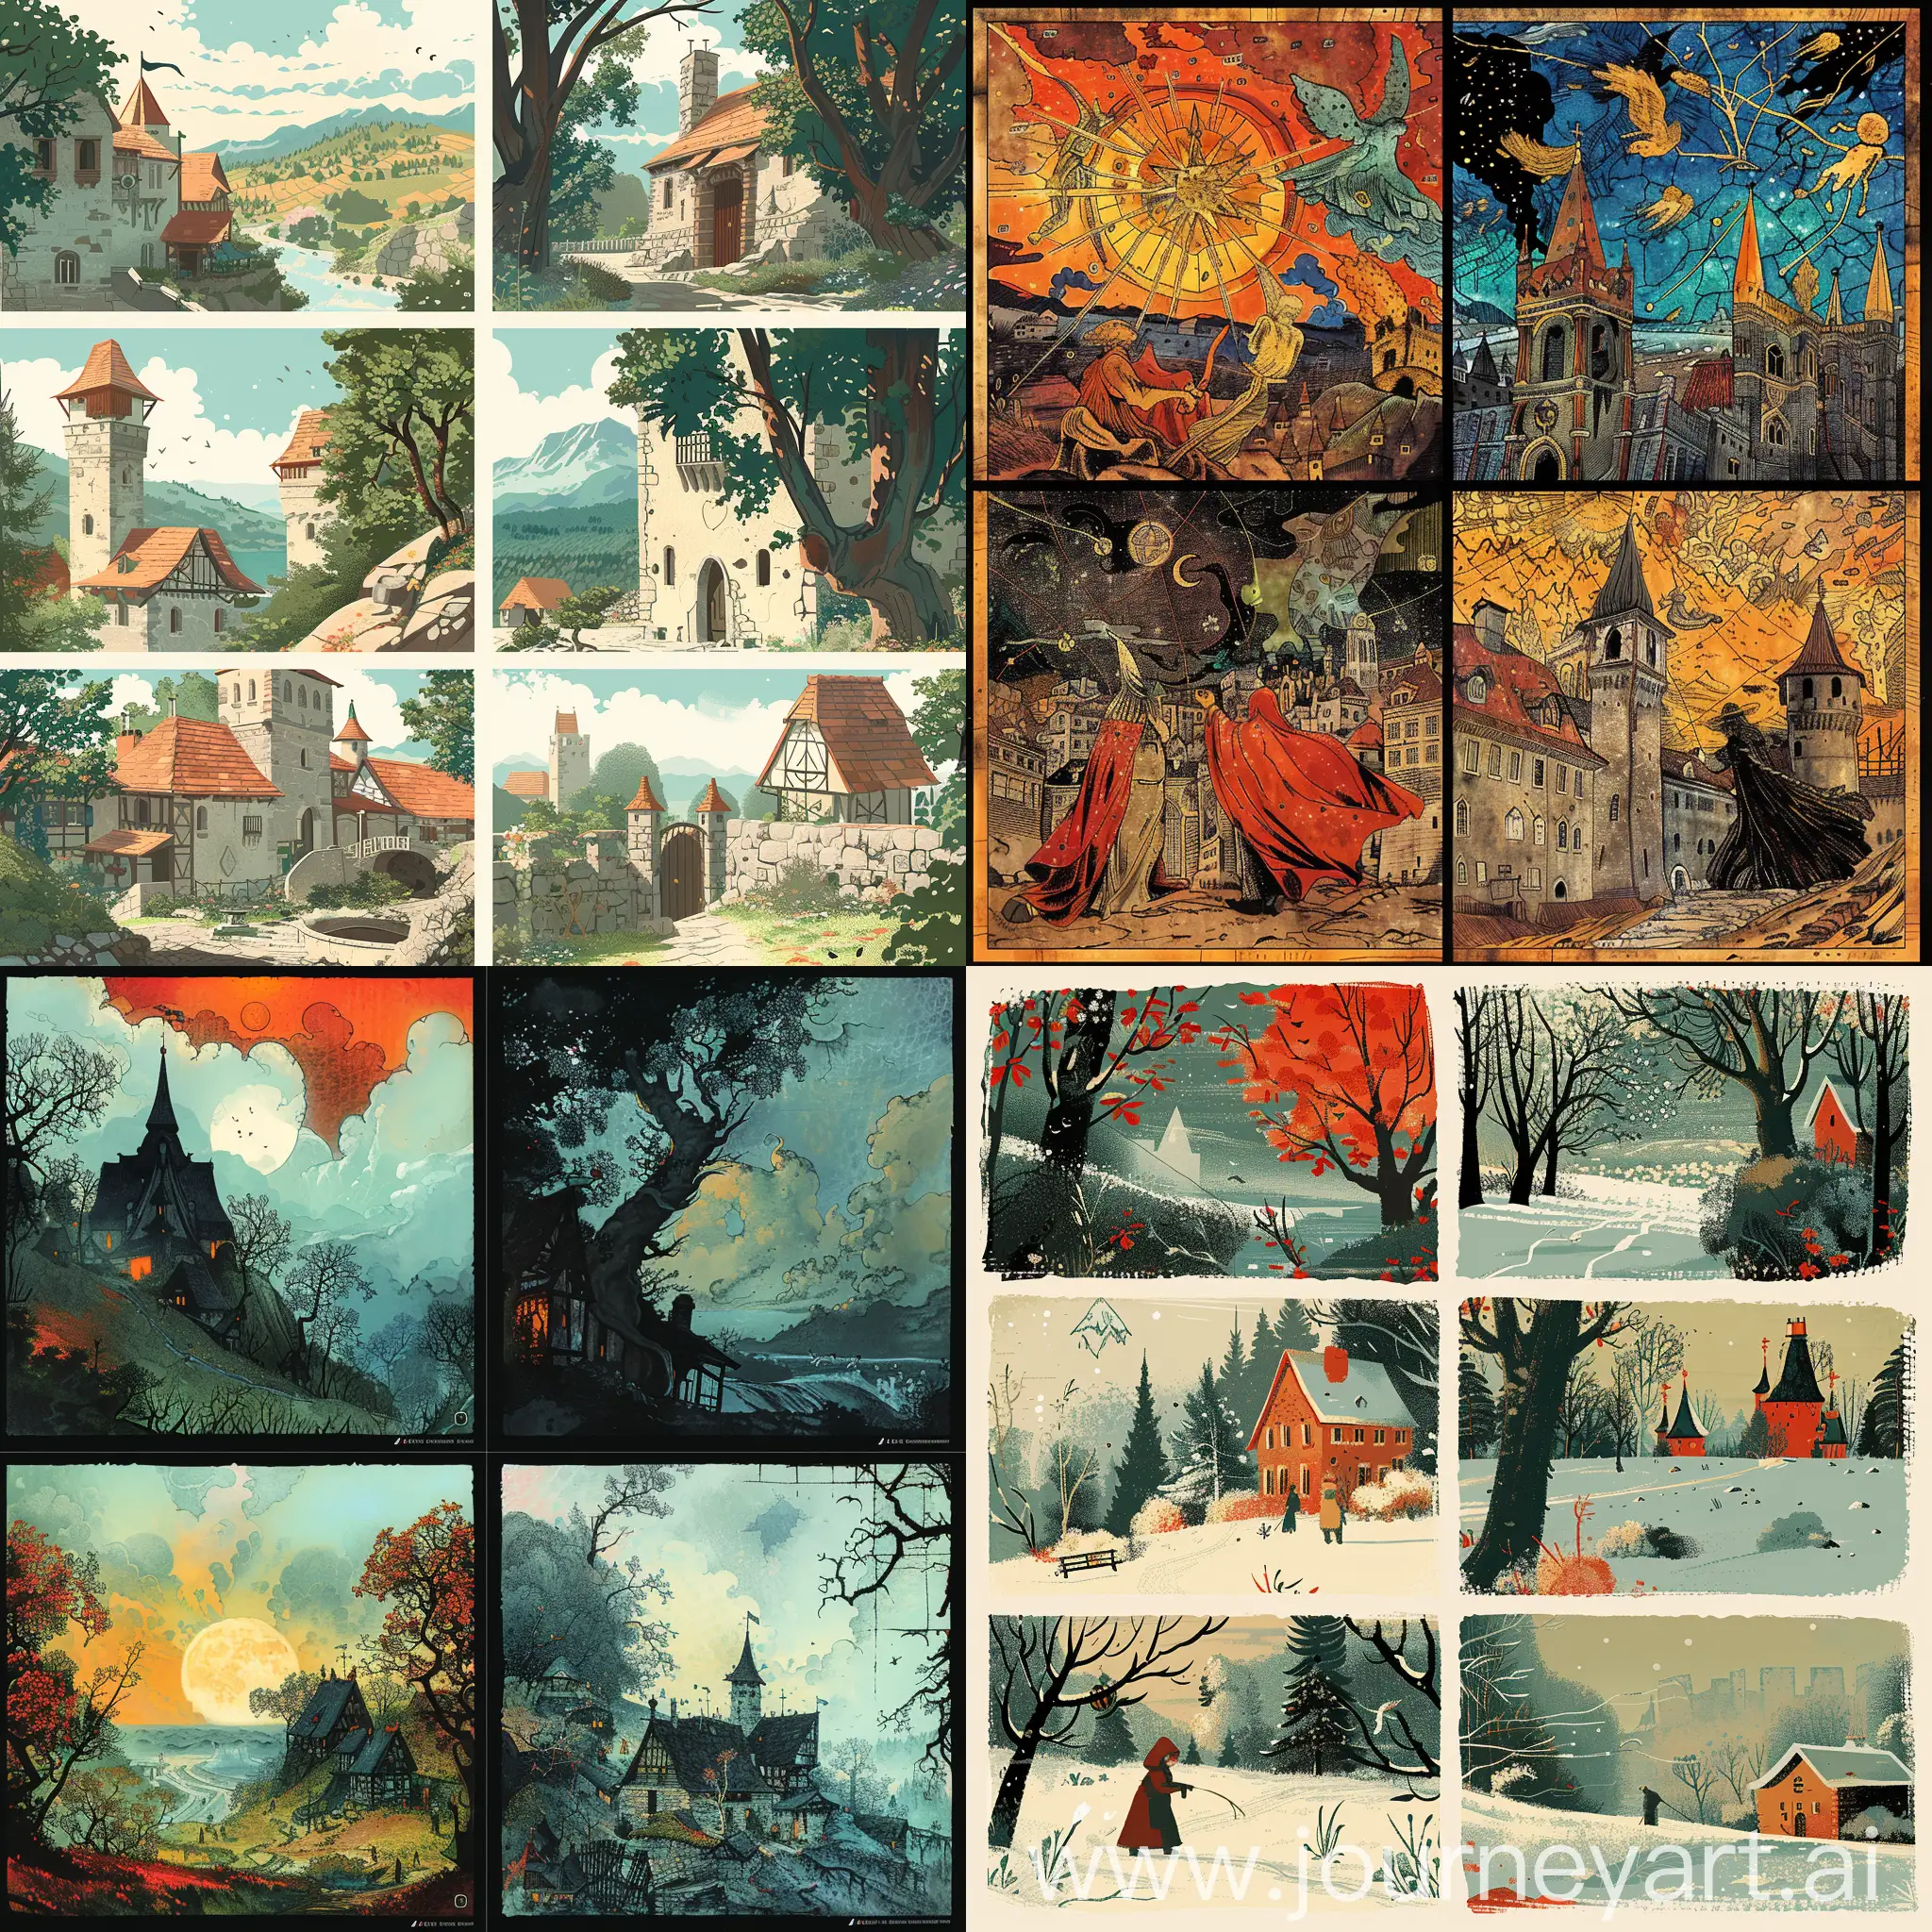 Russian-Fairy-Tale-Storyboard-FourFrame-Graphics-Narrative